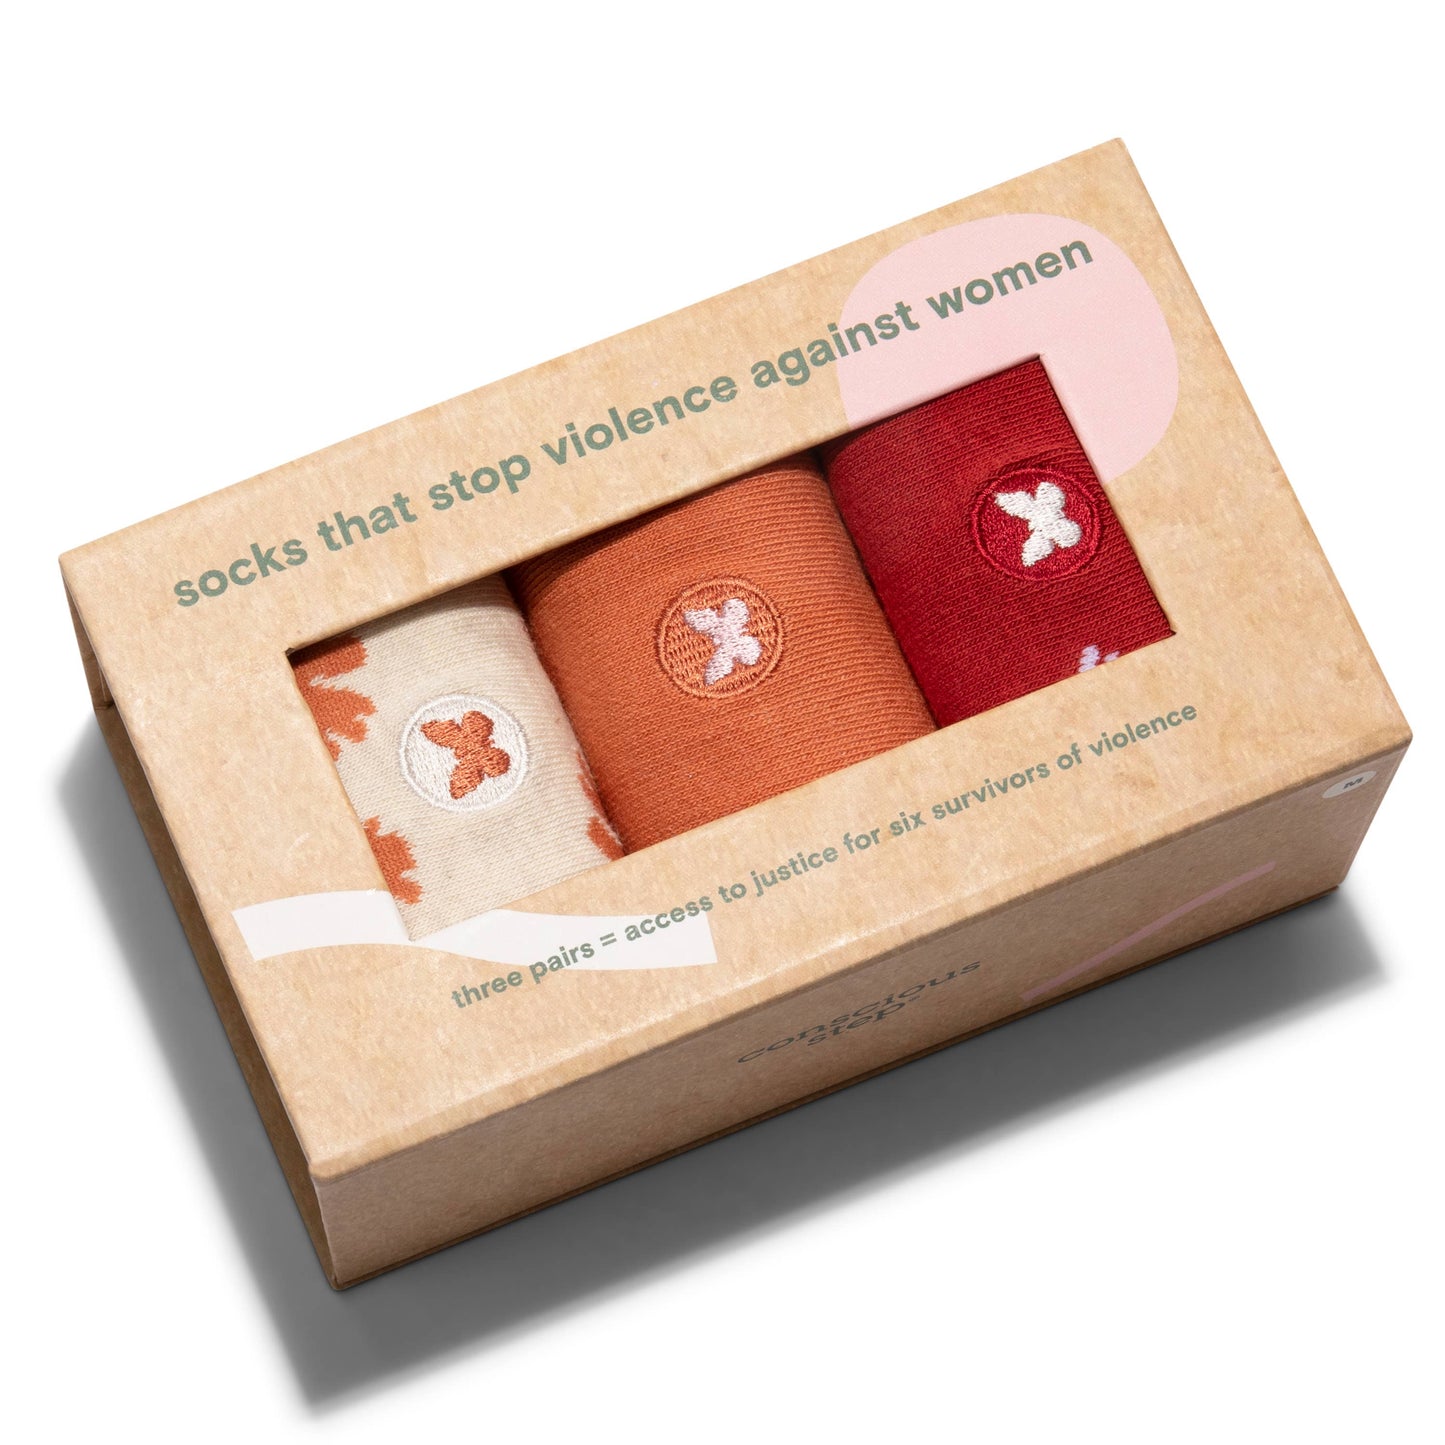 Boxed Set socks that stop violence against women (Small) Accessories Conscious Step   